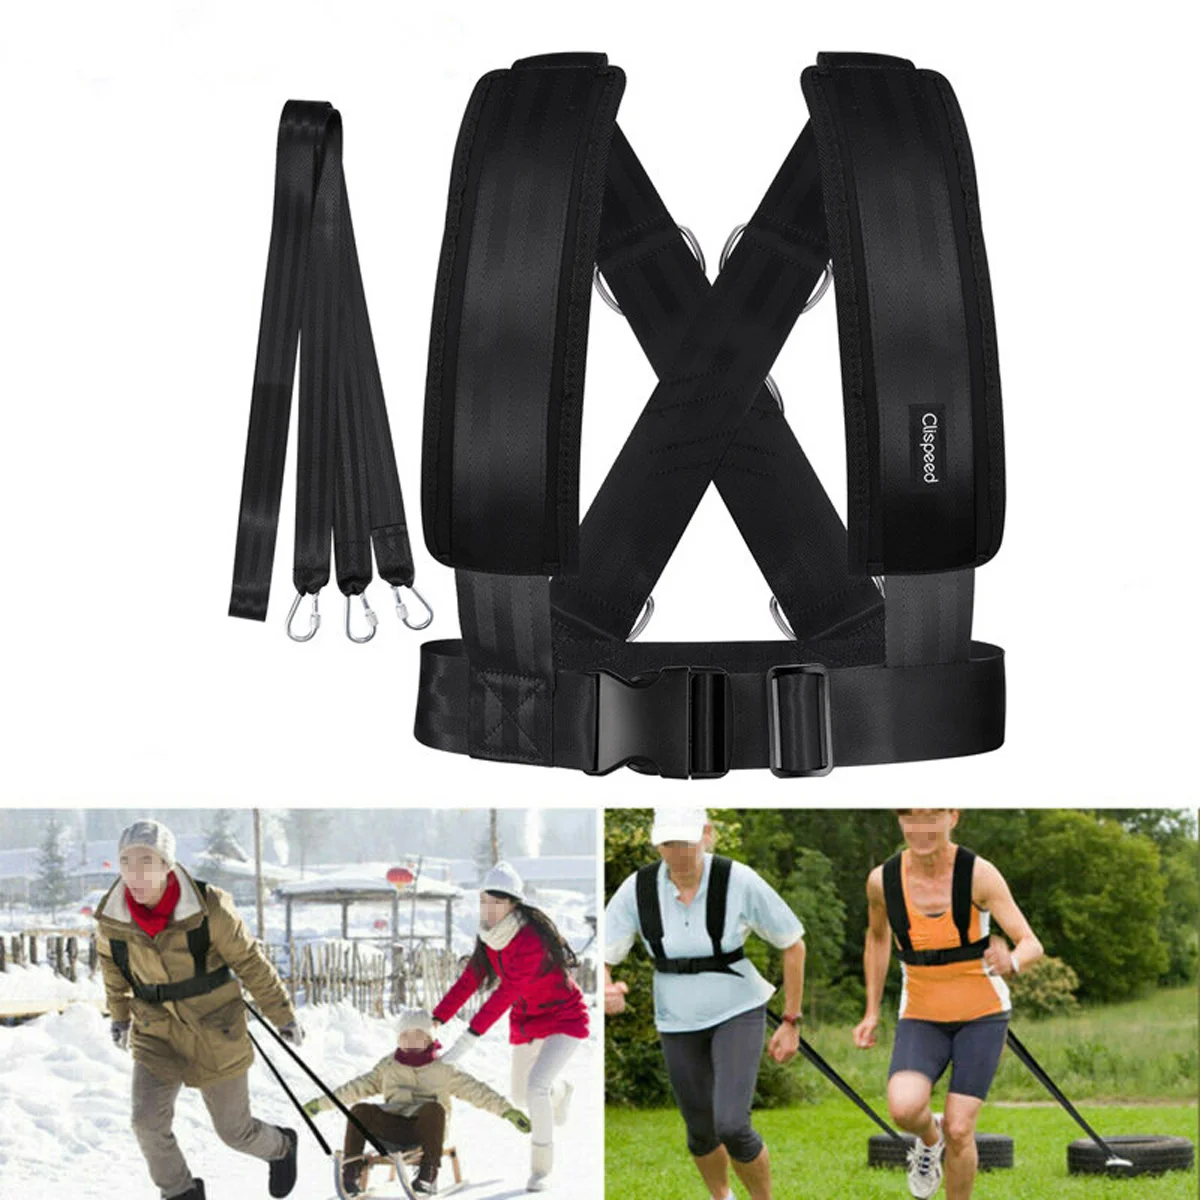 

Clispeed Sled Workout Harness Black One Size Practical Resistance Band Fitness Harness Workout Strap for Men Training Daily